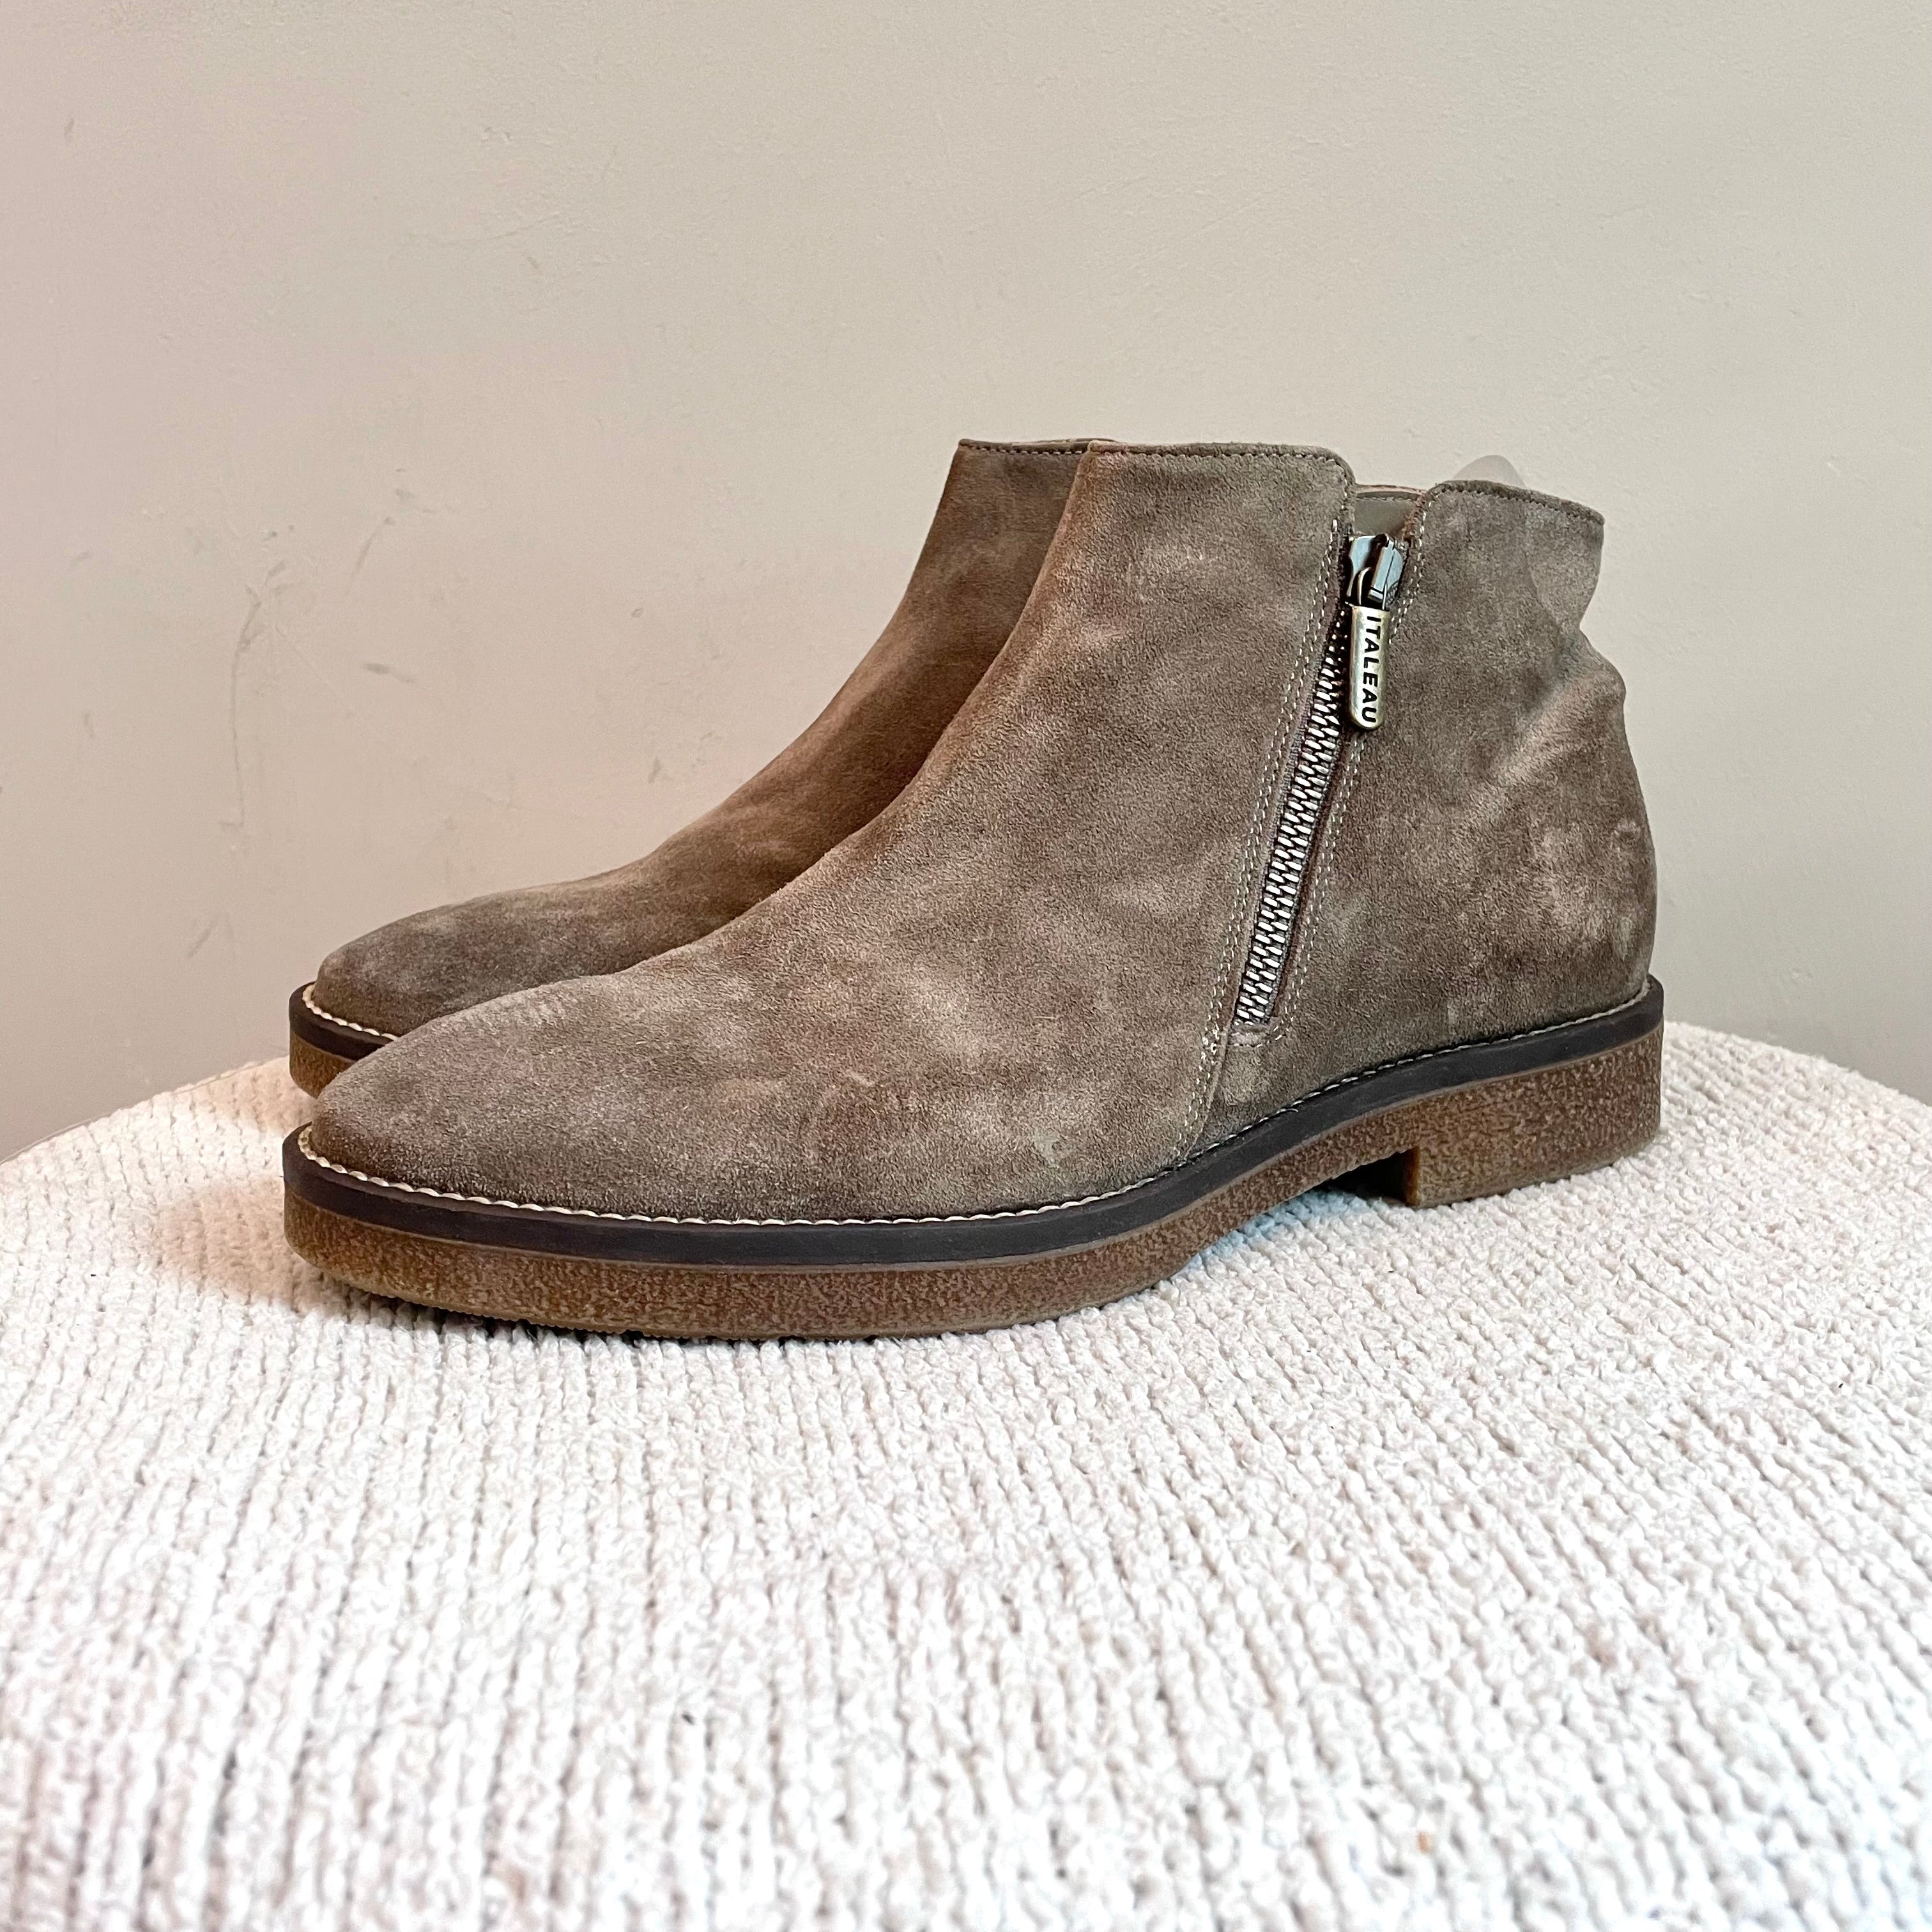 Waterproof Suede Leather Ankle Boots